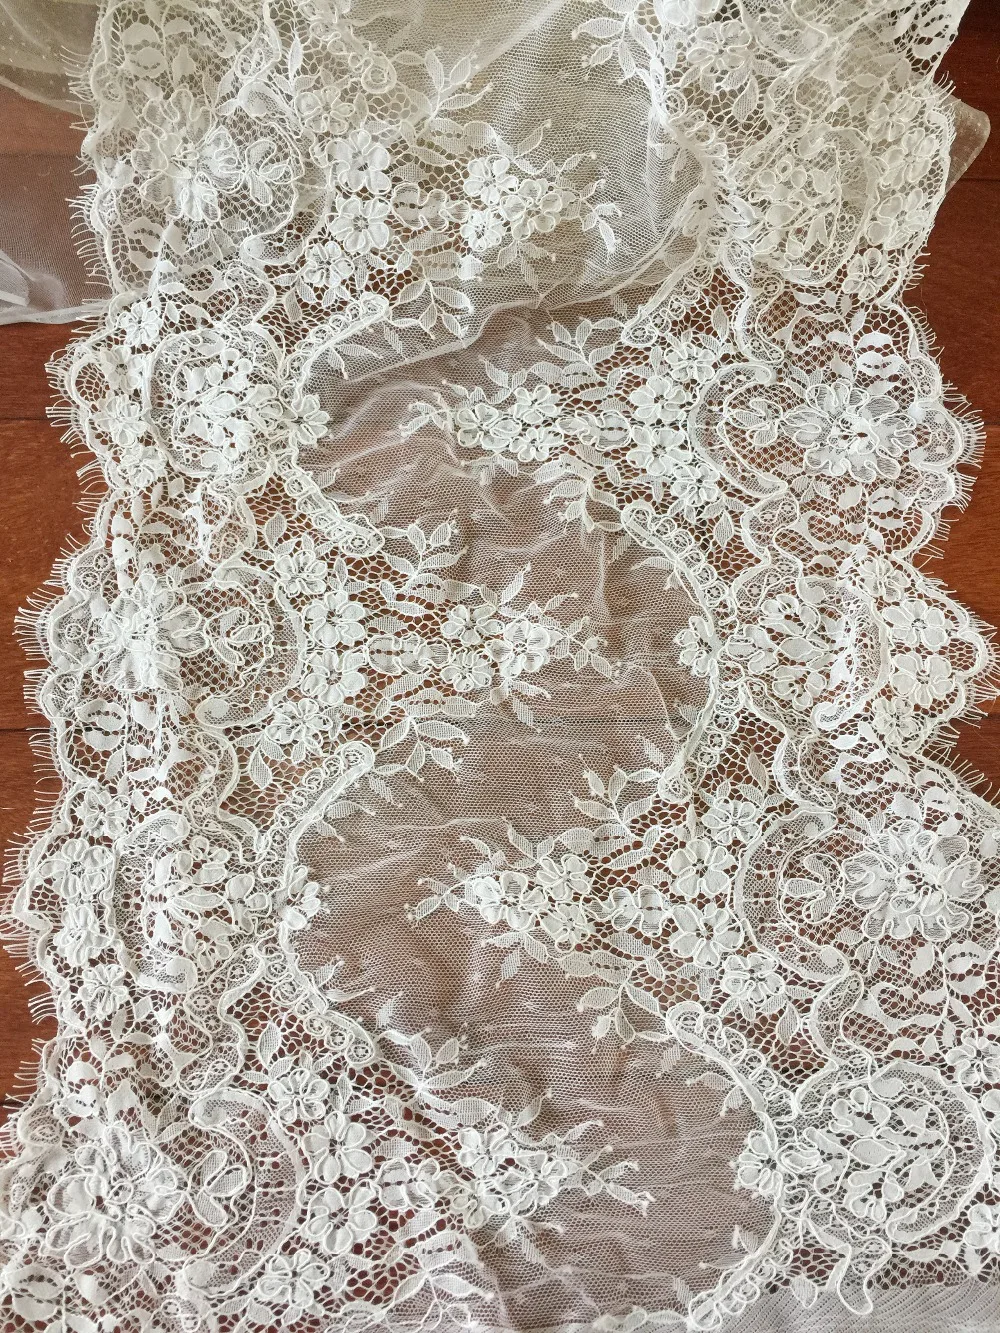 

3 Yards Top Quality French Alencon Lace Fabric , Cord Floral Embroidery Scalloped Trim for Wedding Veils Shrug 40 cm wide